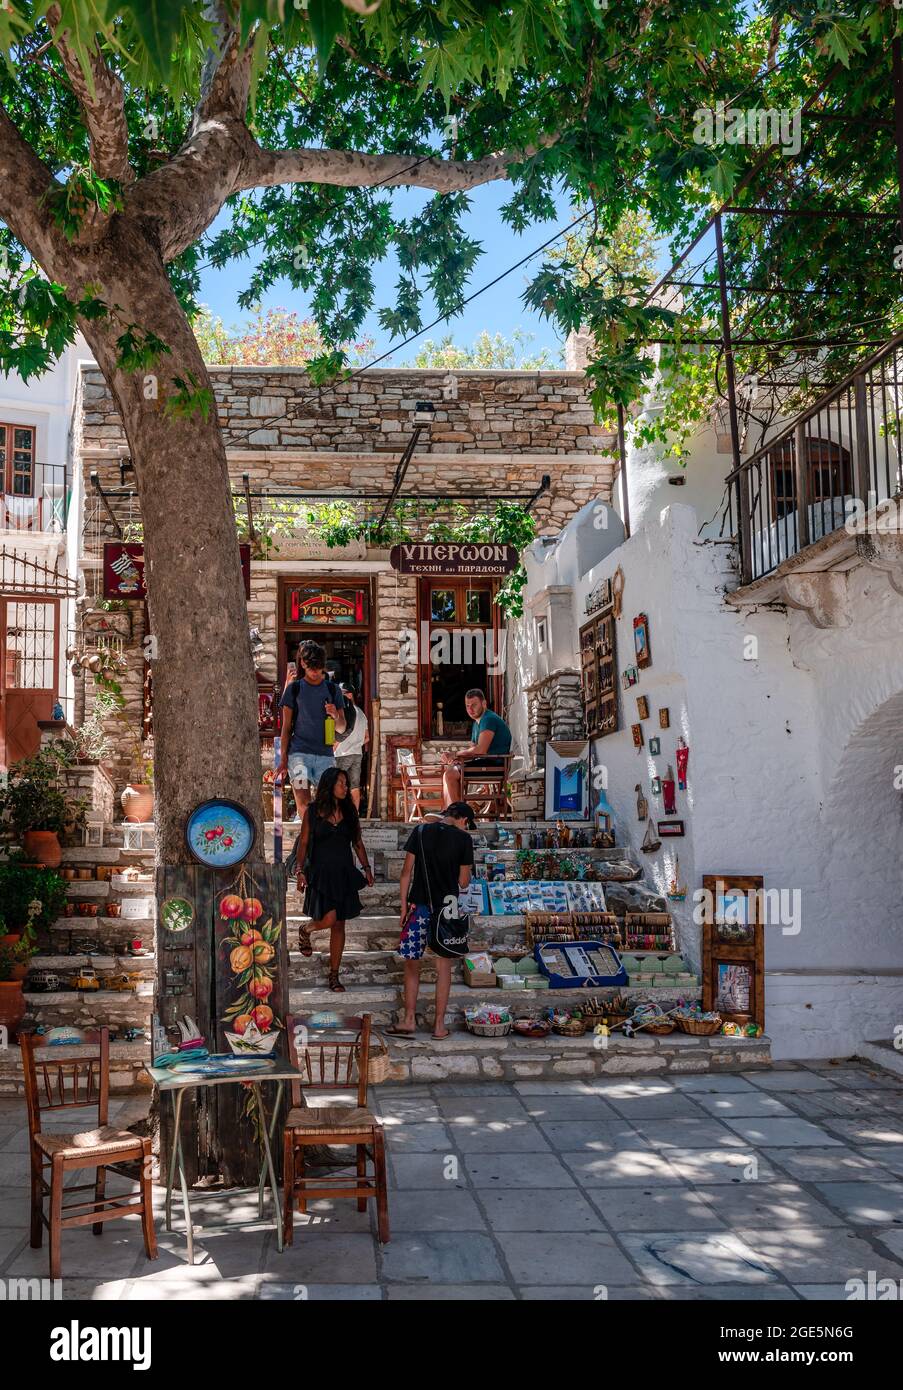 The square of Apeiranthos (or Aperathos), a mountainous village built on the foothill of mount Fanarion, in the island of Naxos, Cyclades, Greece. Stock Photo